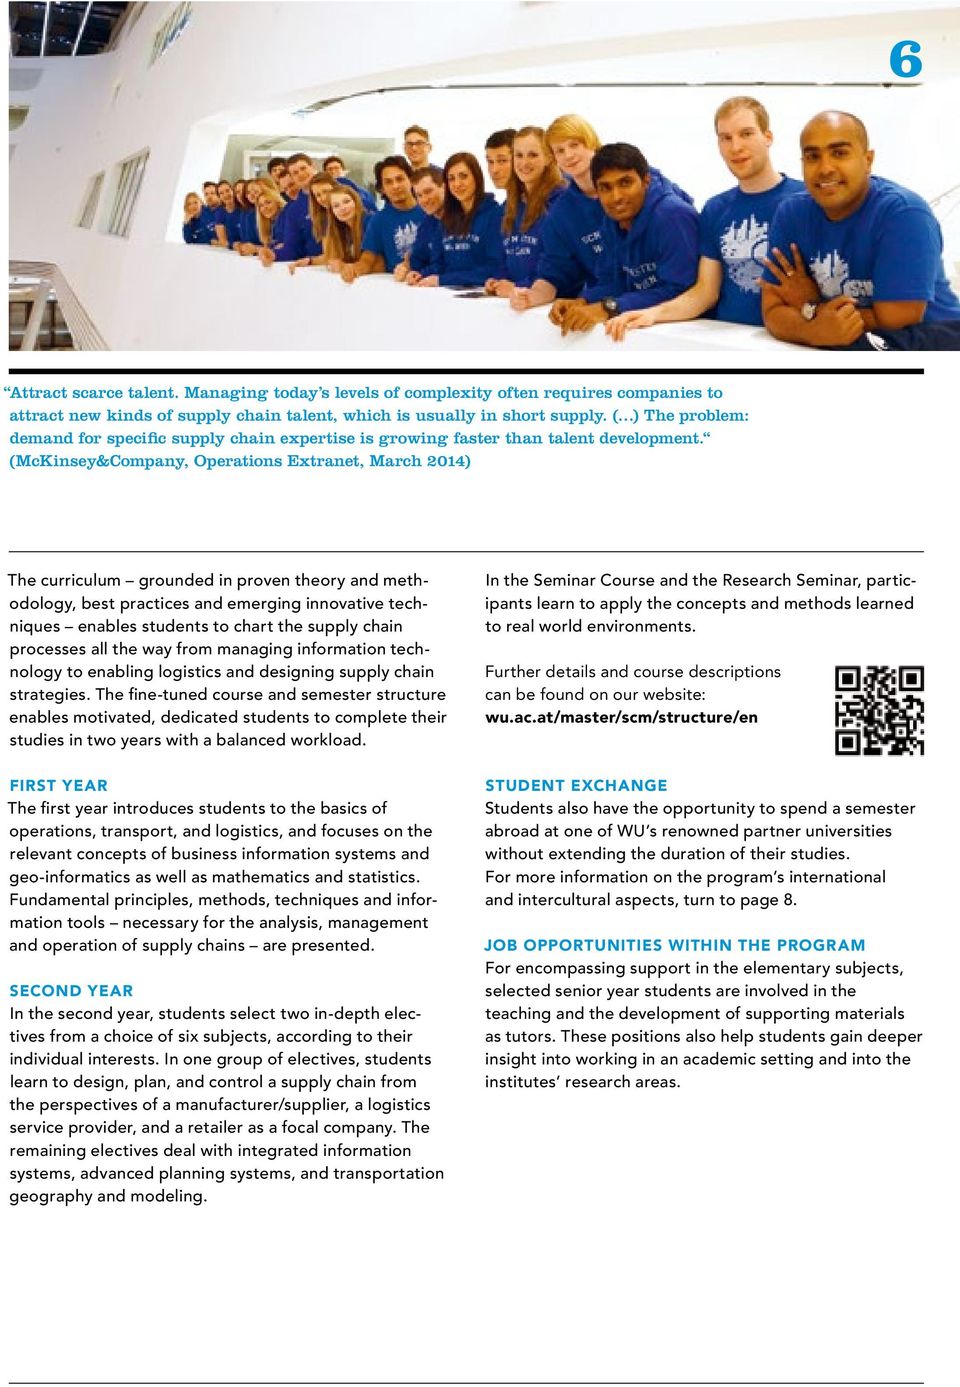 (McKinsey&Company, Operations Extranet, March 2014) The curriculum grounded in proven theory and methodology, best practices and emerging innovative techniques enables students to chart the supply